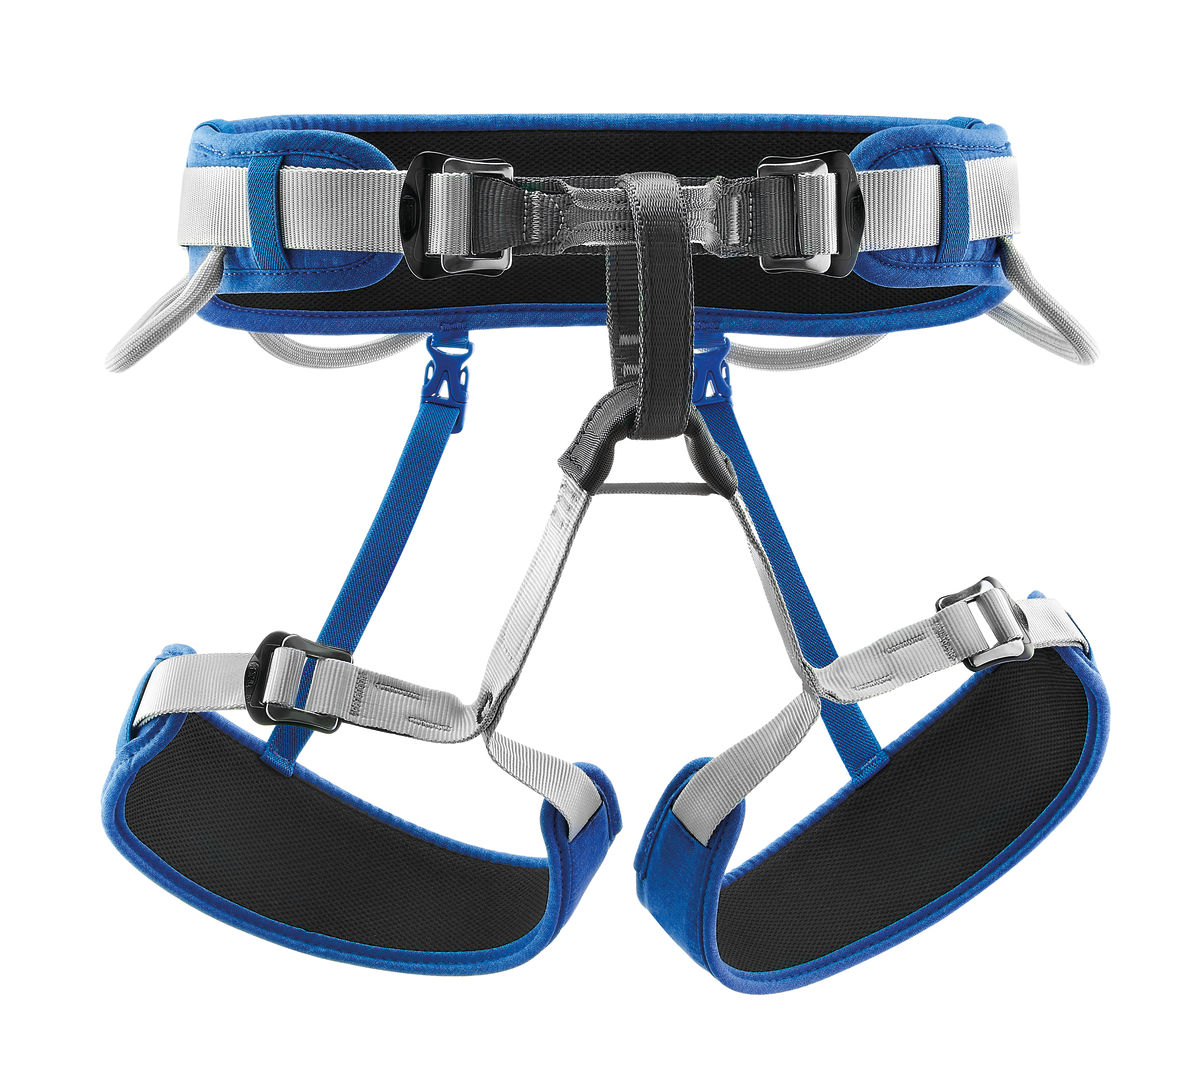 CORAX, Versatile and fully adjustable climbing and mountaineering